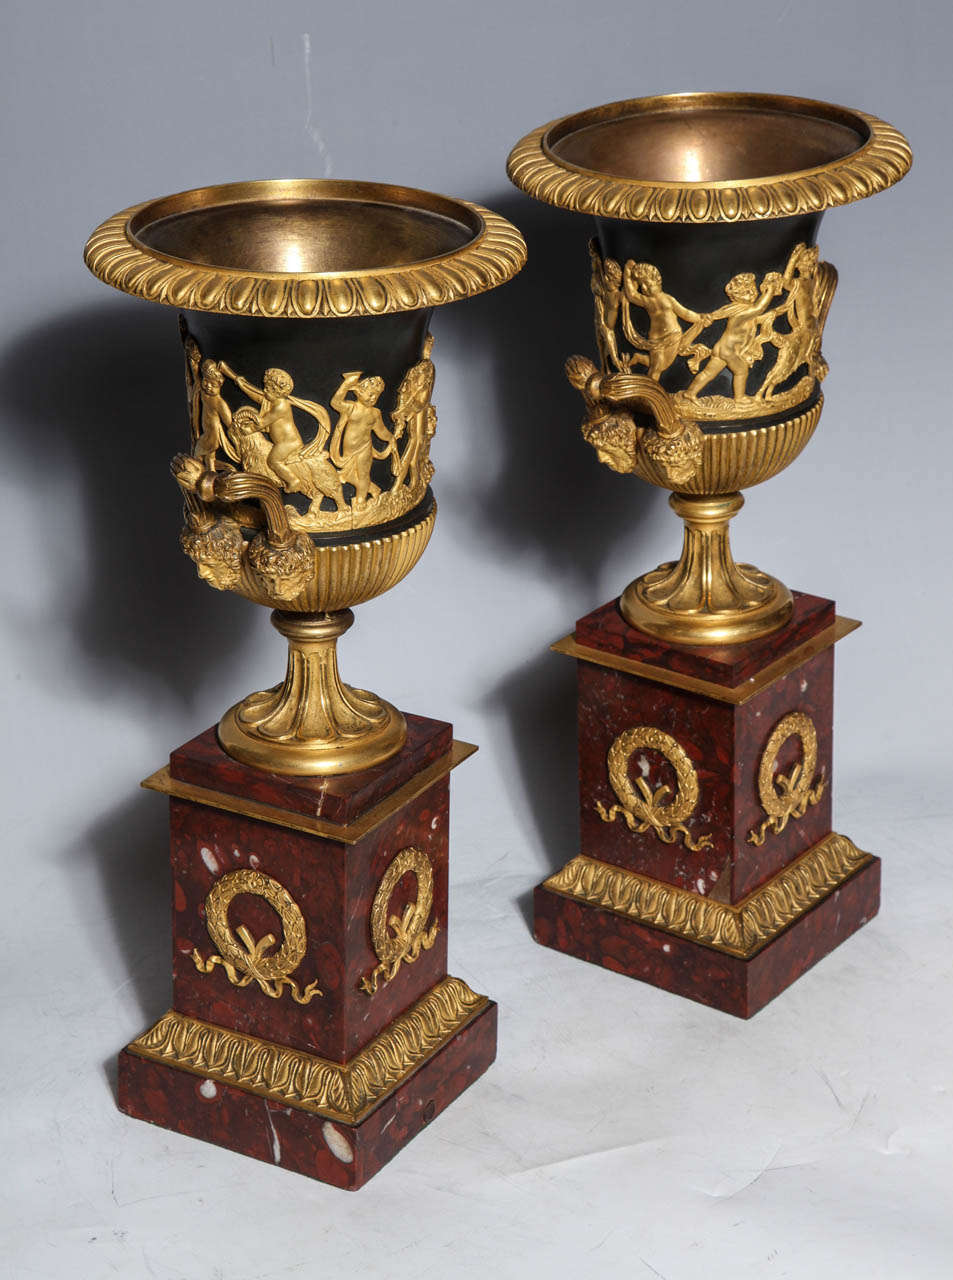 A pair of neoclassical French Empire Period doré Bronze, patinated bronze and Rouge Campana shaped marble vases, circa 1820, with gilt bronze decorations of finely sculpted playful putti. Additionally, masks uphold the elegant flaring handles. The